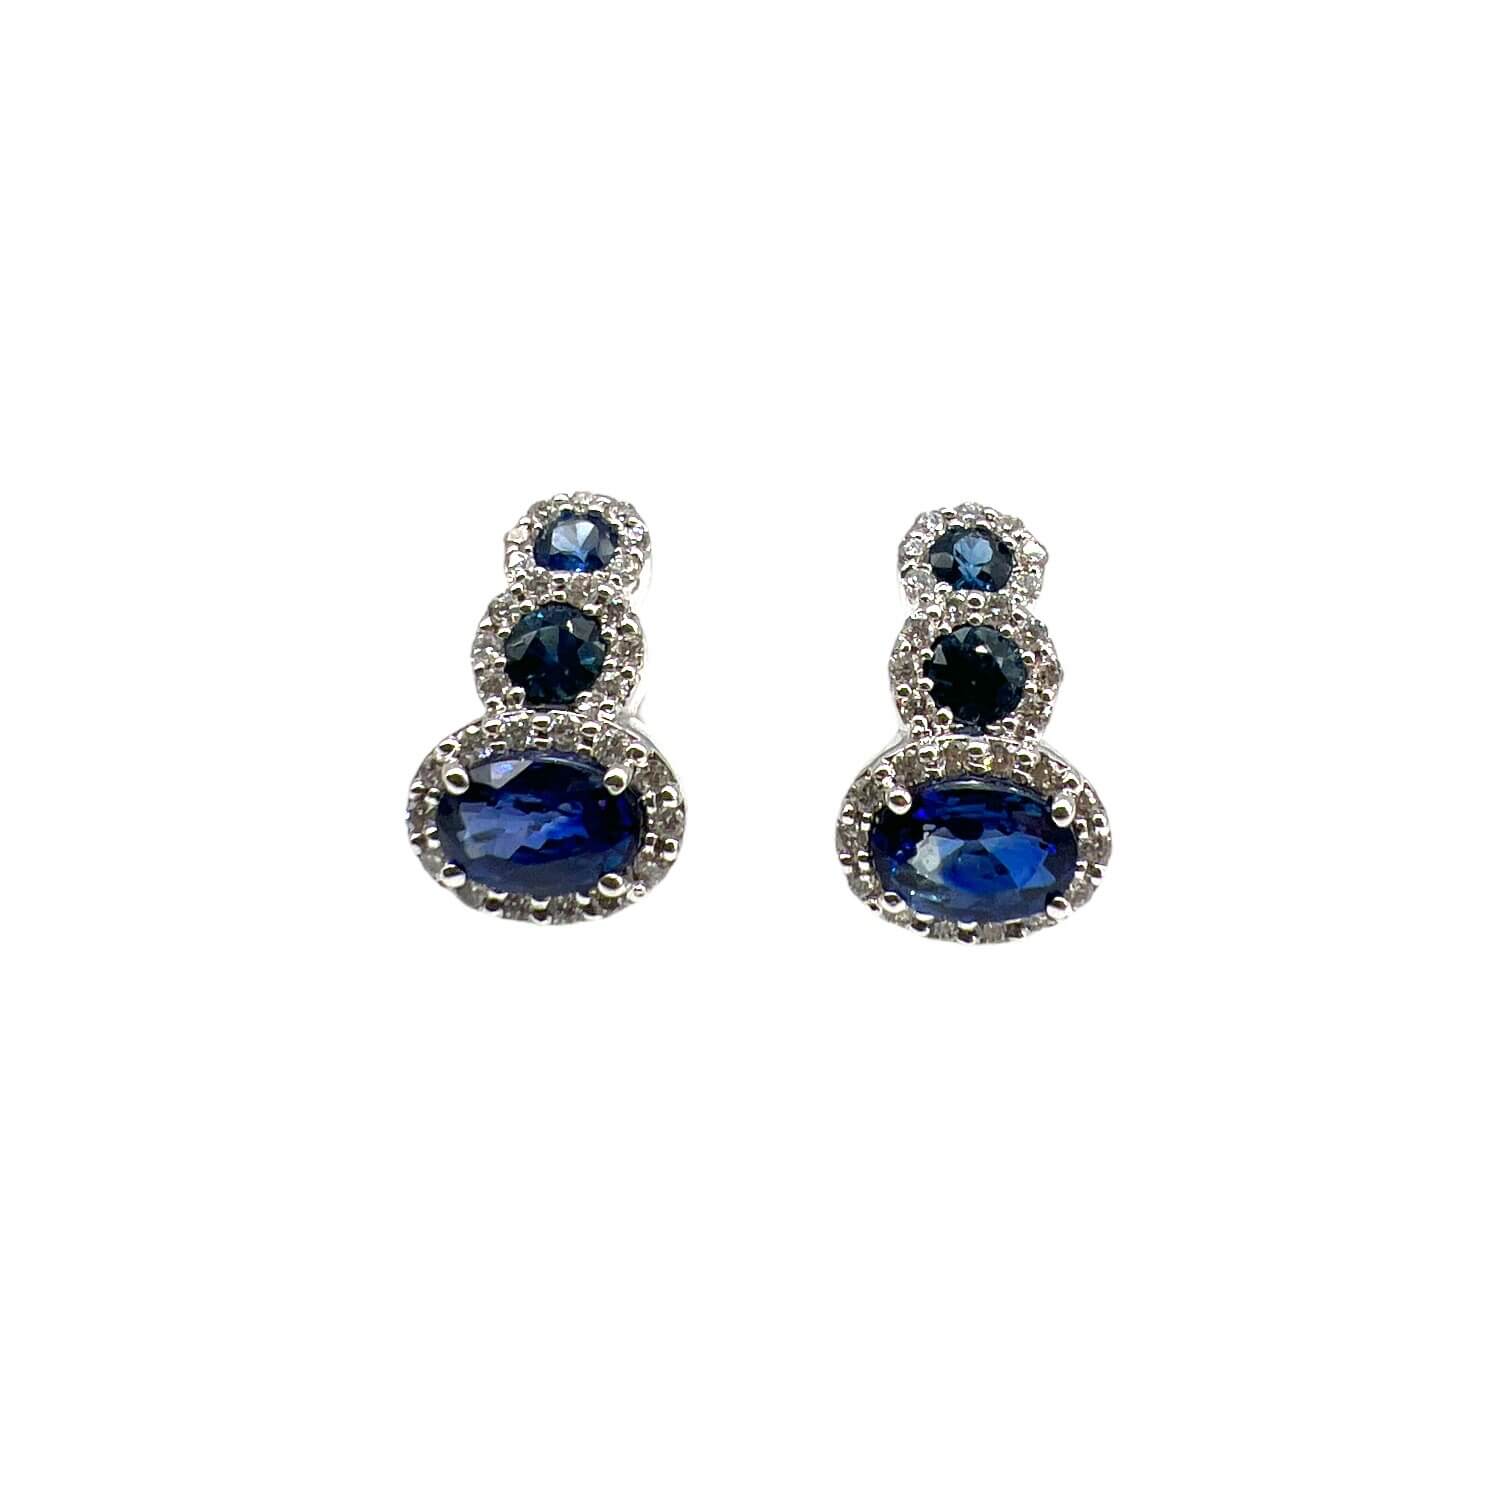 Gold Sapphire Earrings and Diamonds BELLE EPOQUE Art. OR604